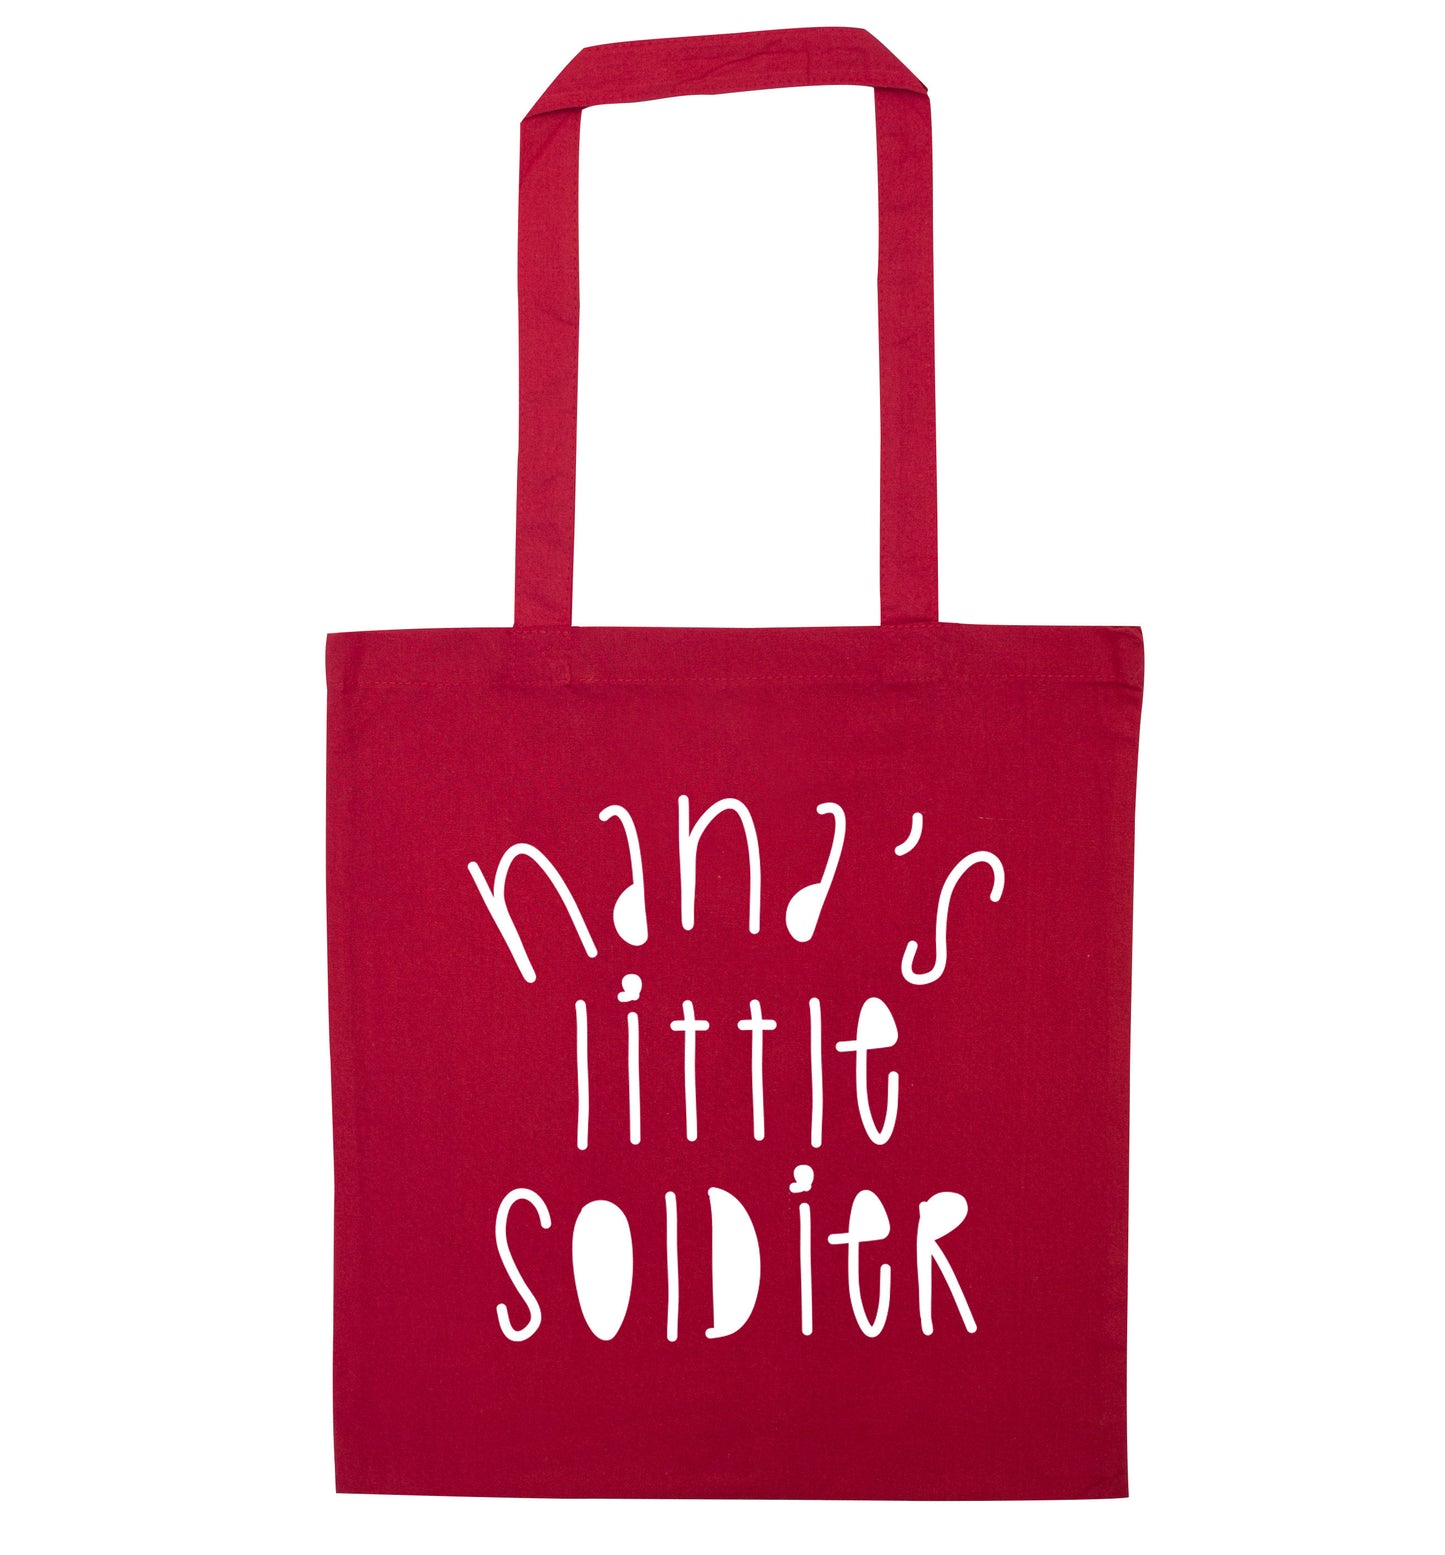 Nana's little soldier red tote bag